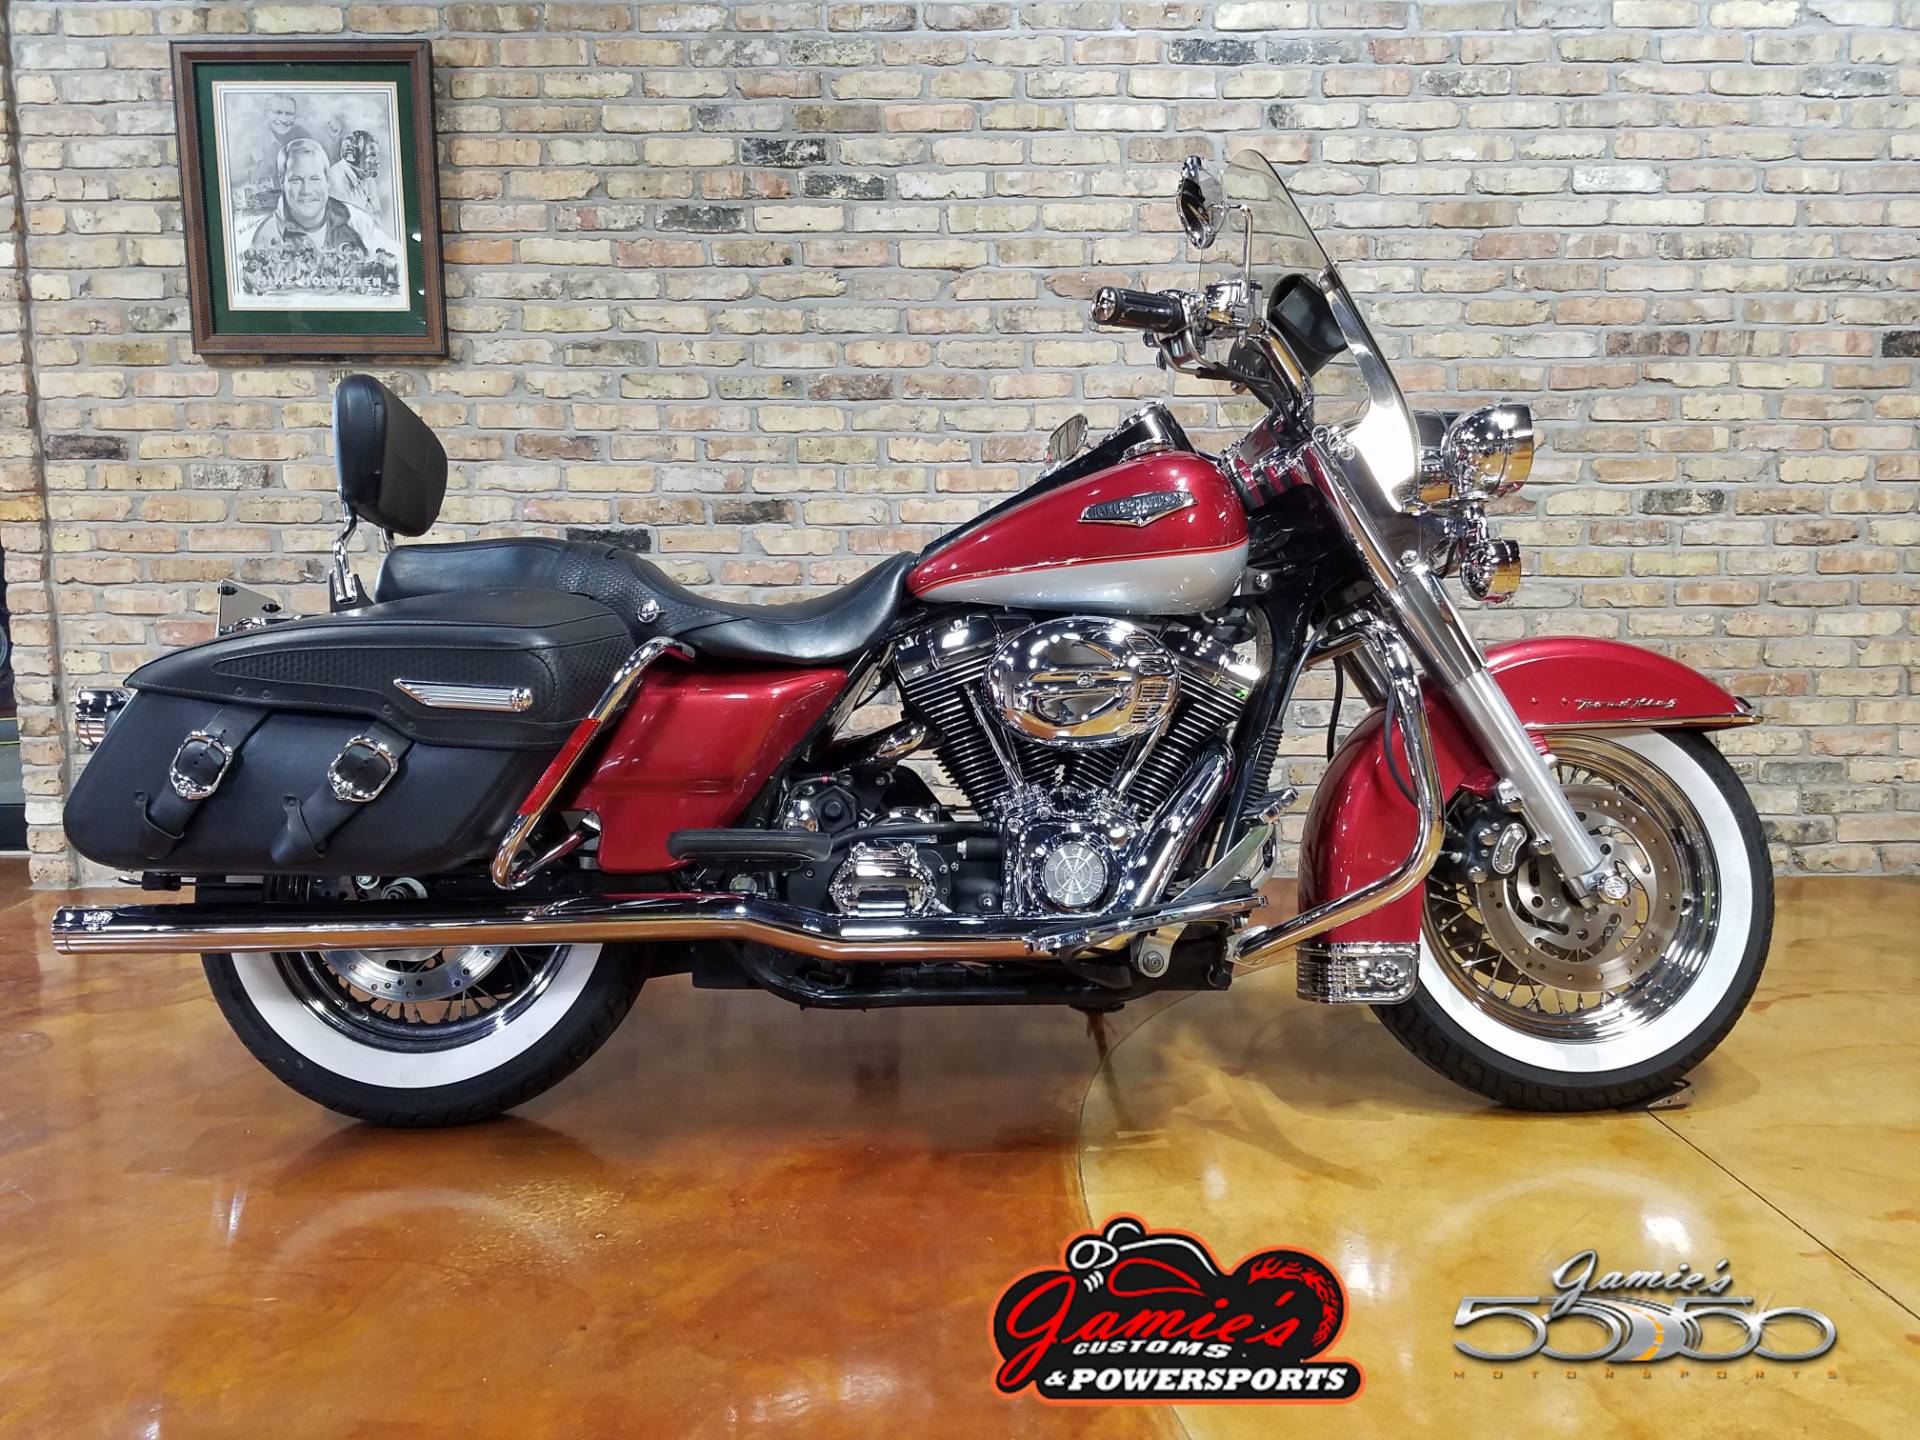 Used 2005 Harley Davidson Flhrci Road King Classic Motorcycles In Big Bend Wi 4322 Two Tone Sierra Red Pearl Brilliant Silver Pearl